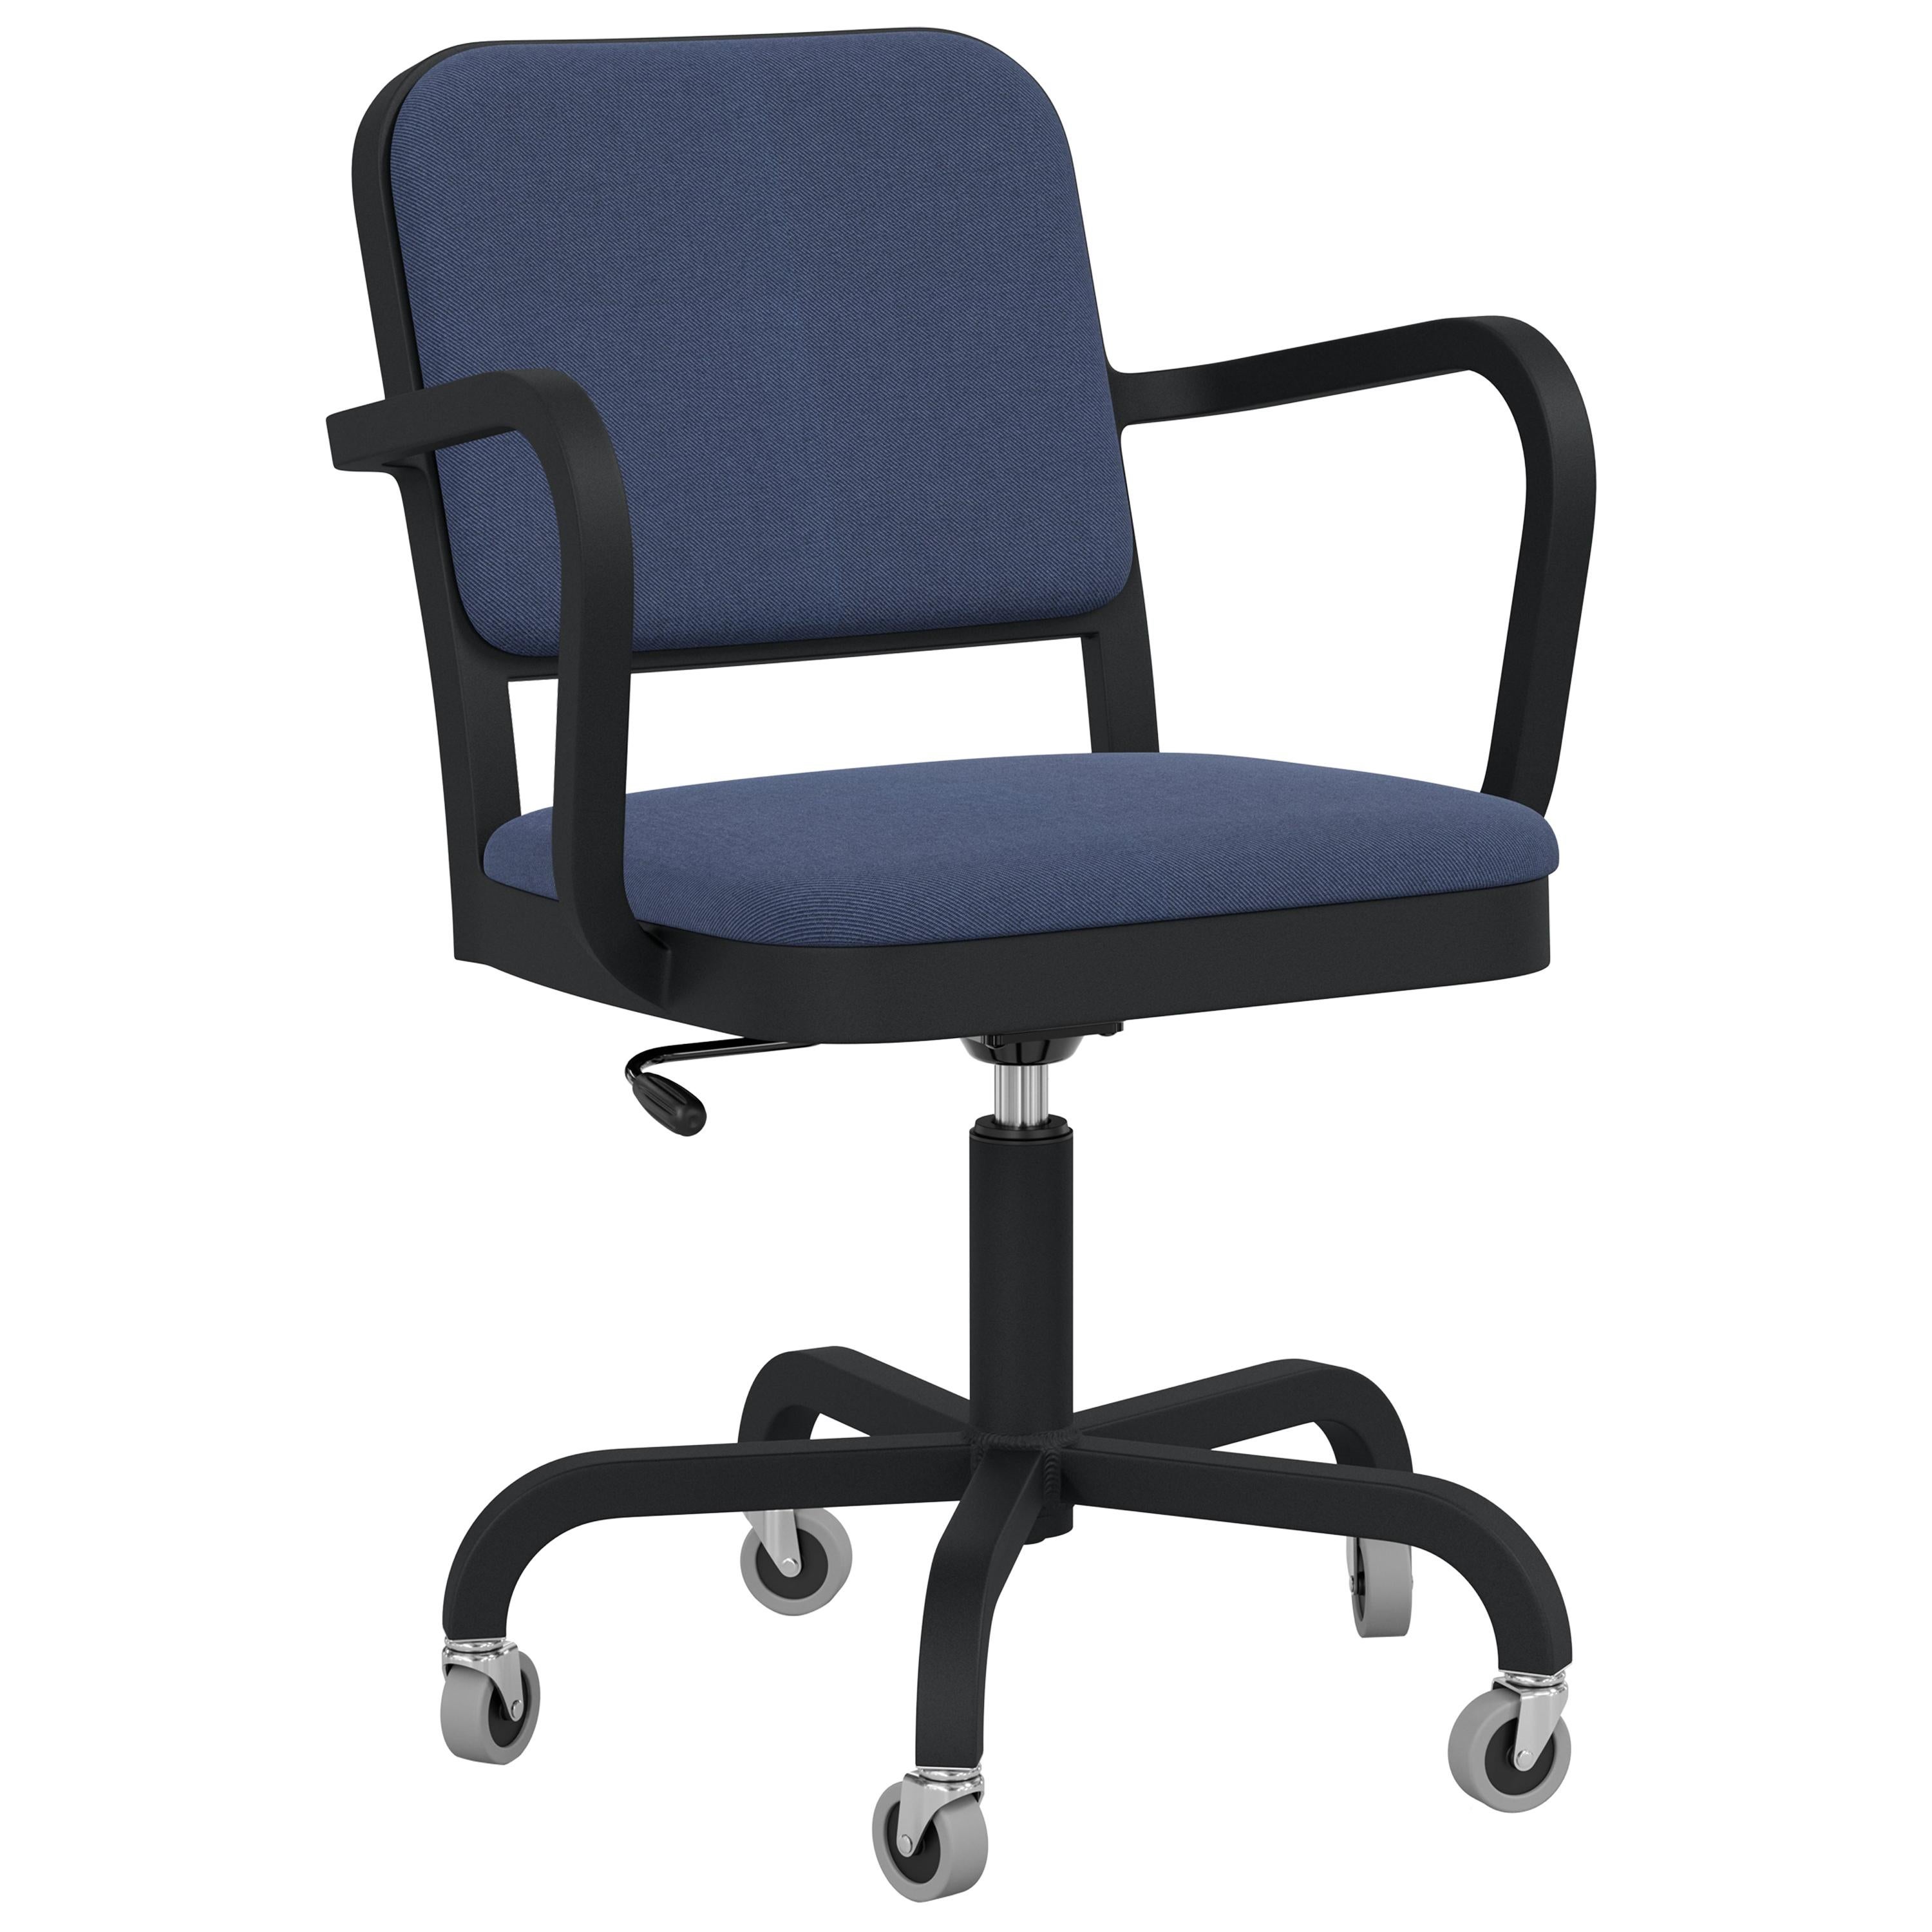 Emeco Navy Officer Swivel Armchair in Navy Blue Fabric with Black Aluminum Frame